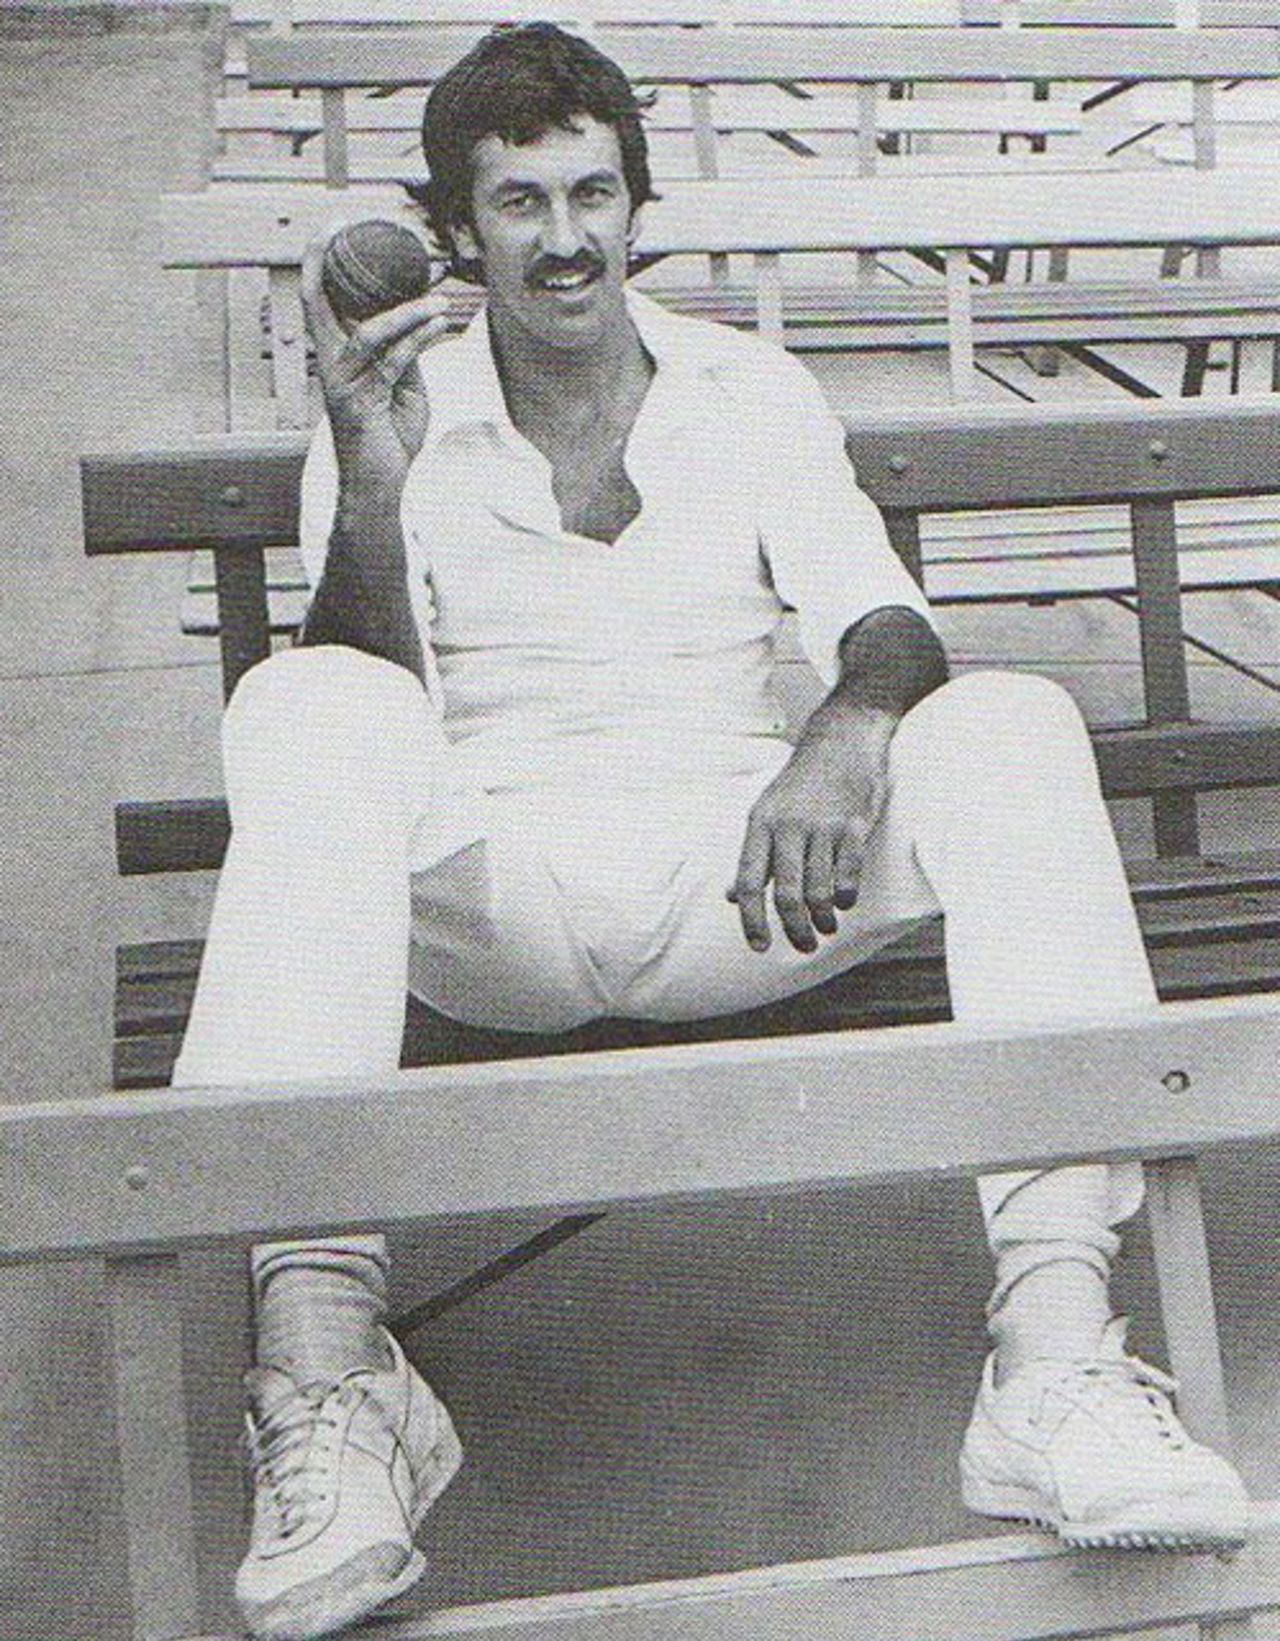 Bruce Yardley poses with the disputed old ball after Graham Yallop had decided to open the innings with two spinners and eschew the new ball, Australia v England, 6th Test, Sydney, February 14, 1979